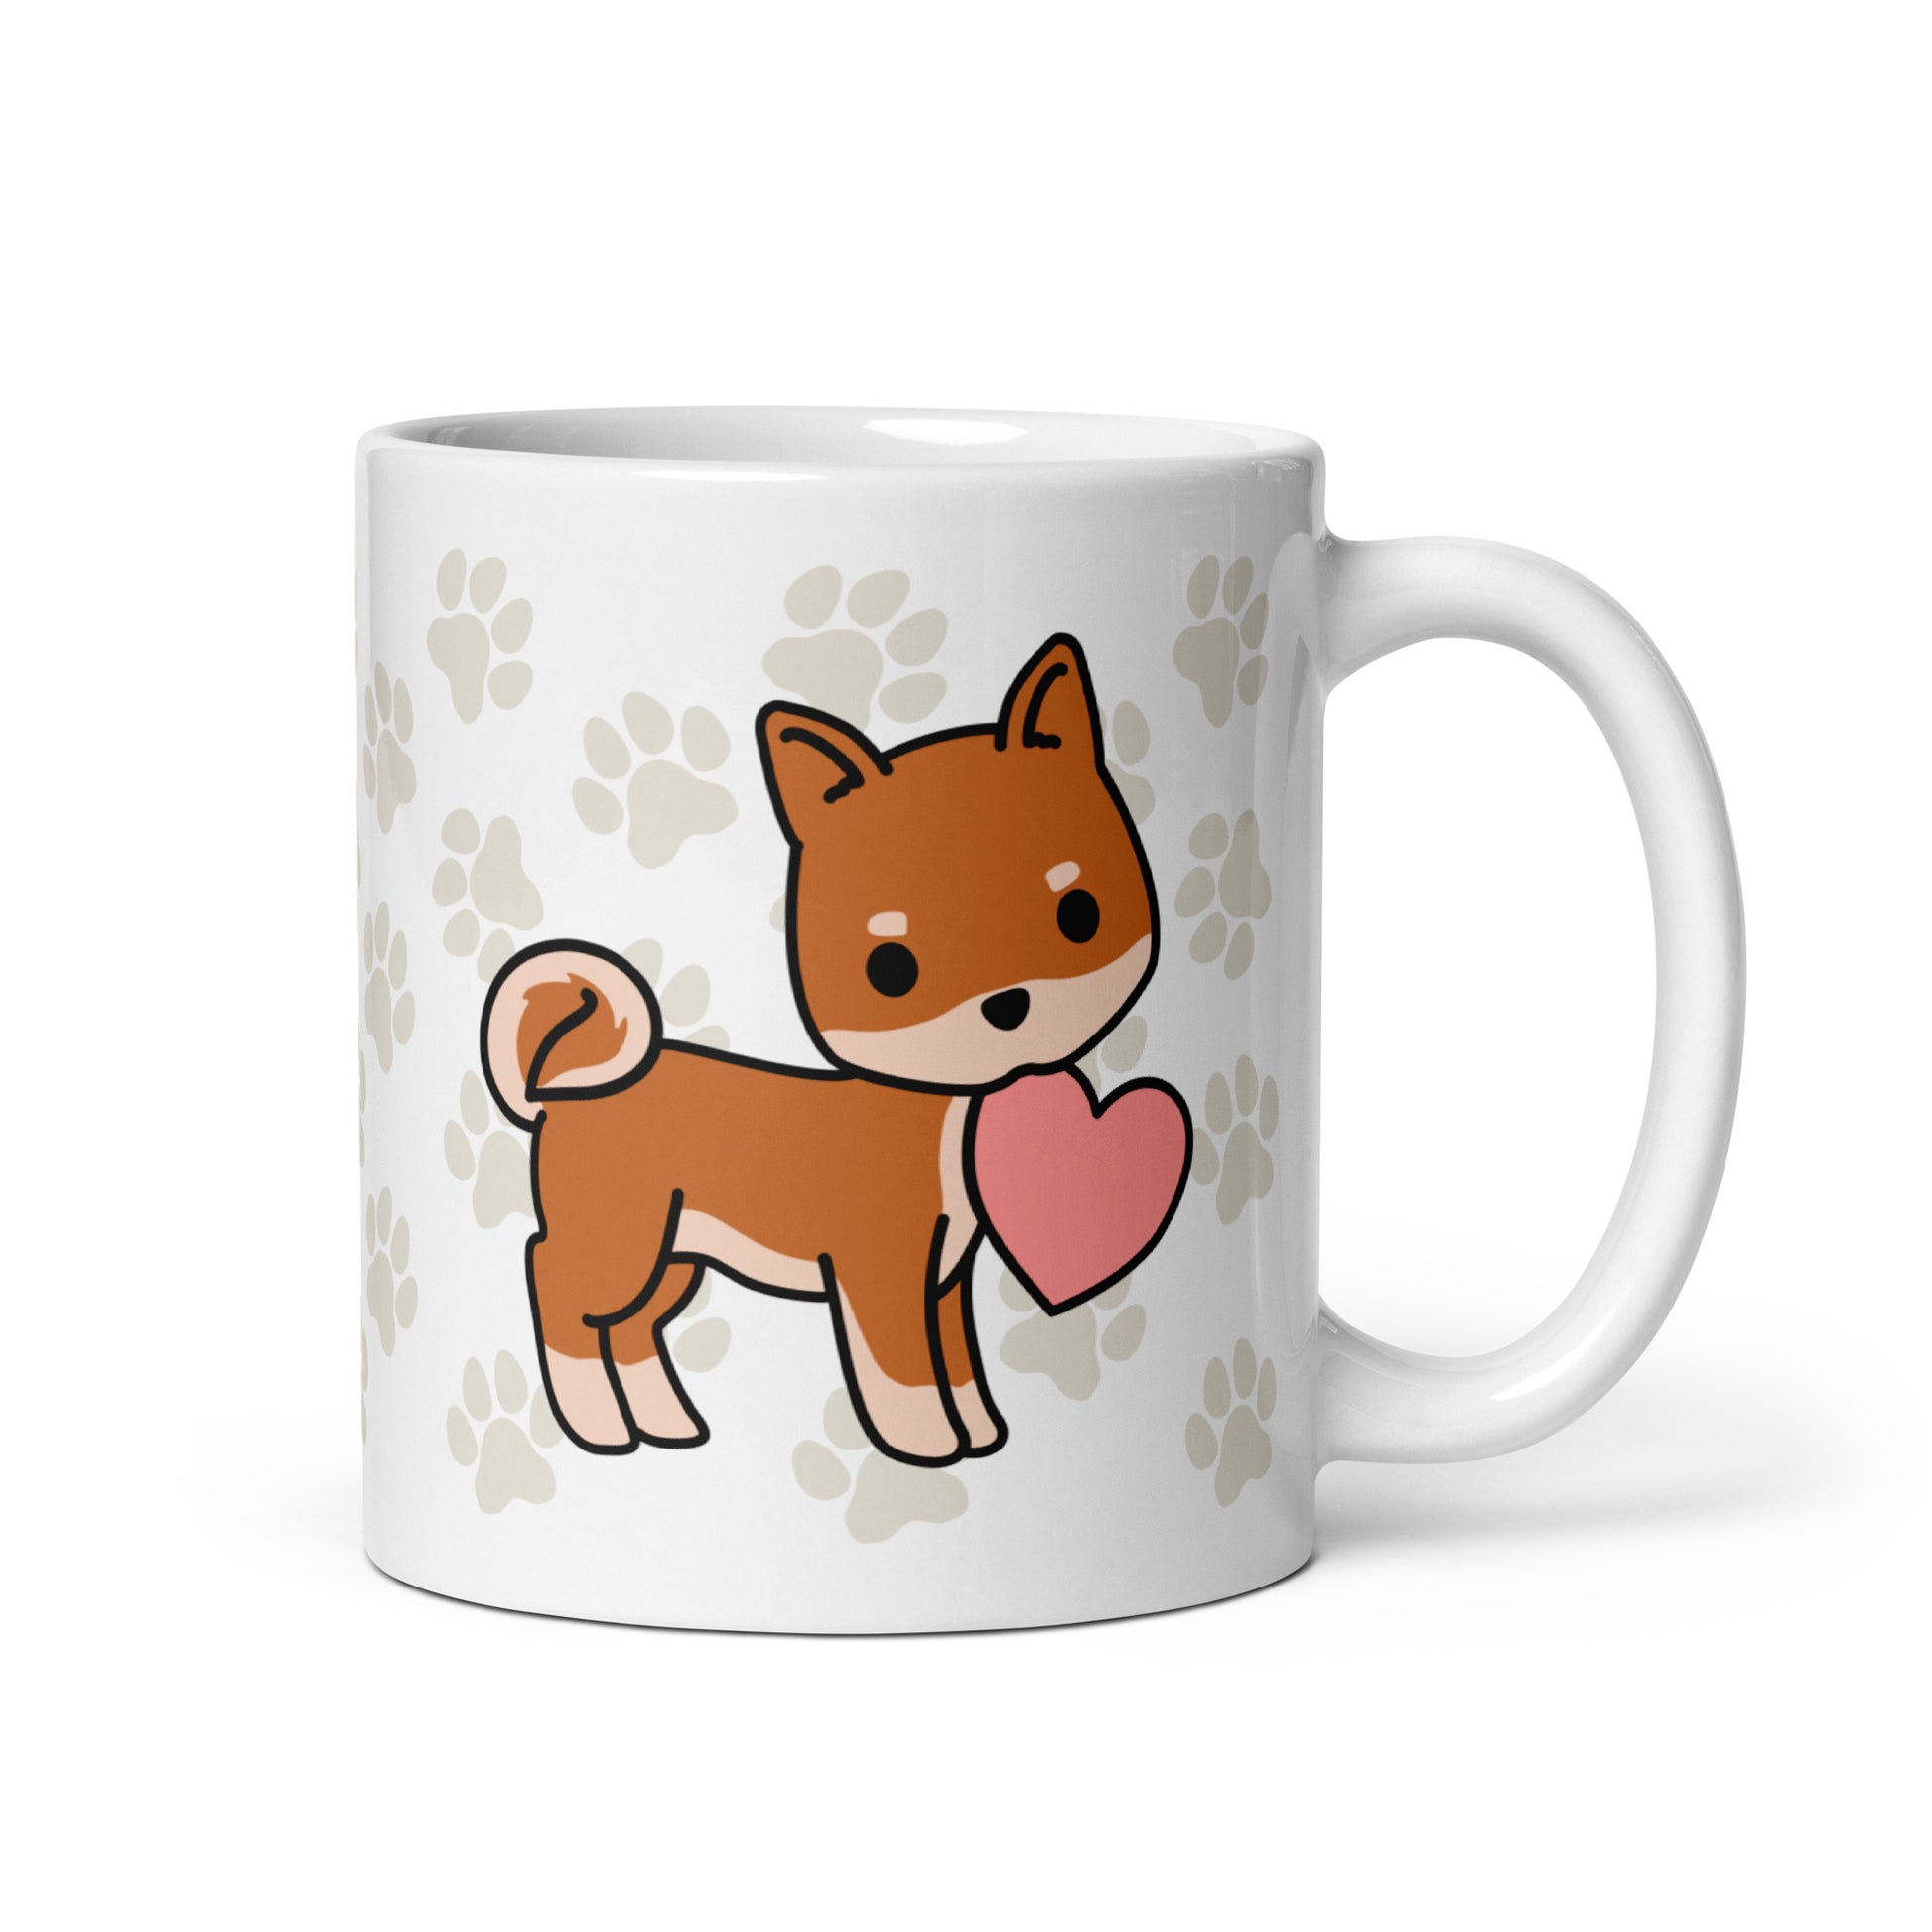 A white 11 ounce ceramic mug with a pattern of light brown pawprints all over. The mug also features a stylized illustration of a Shiba Inu holding a heart in its mouth.